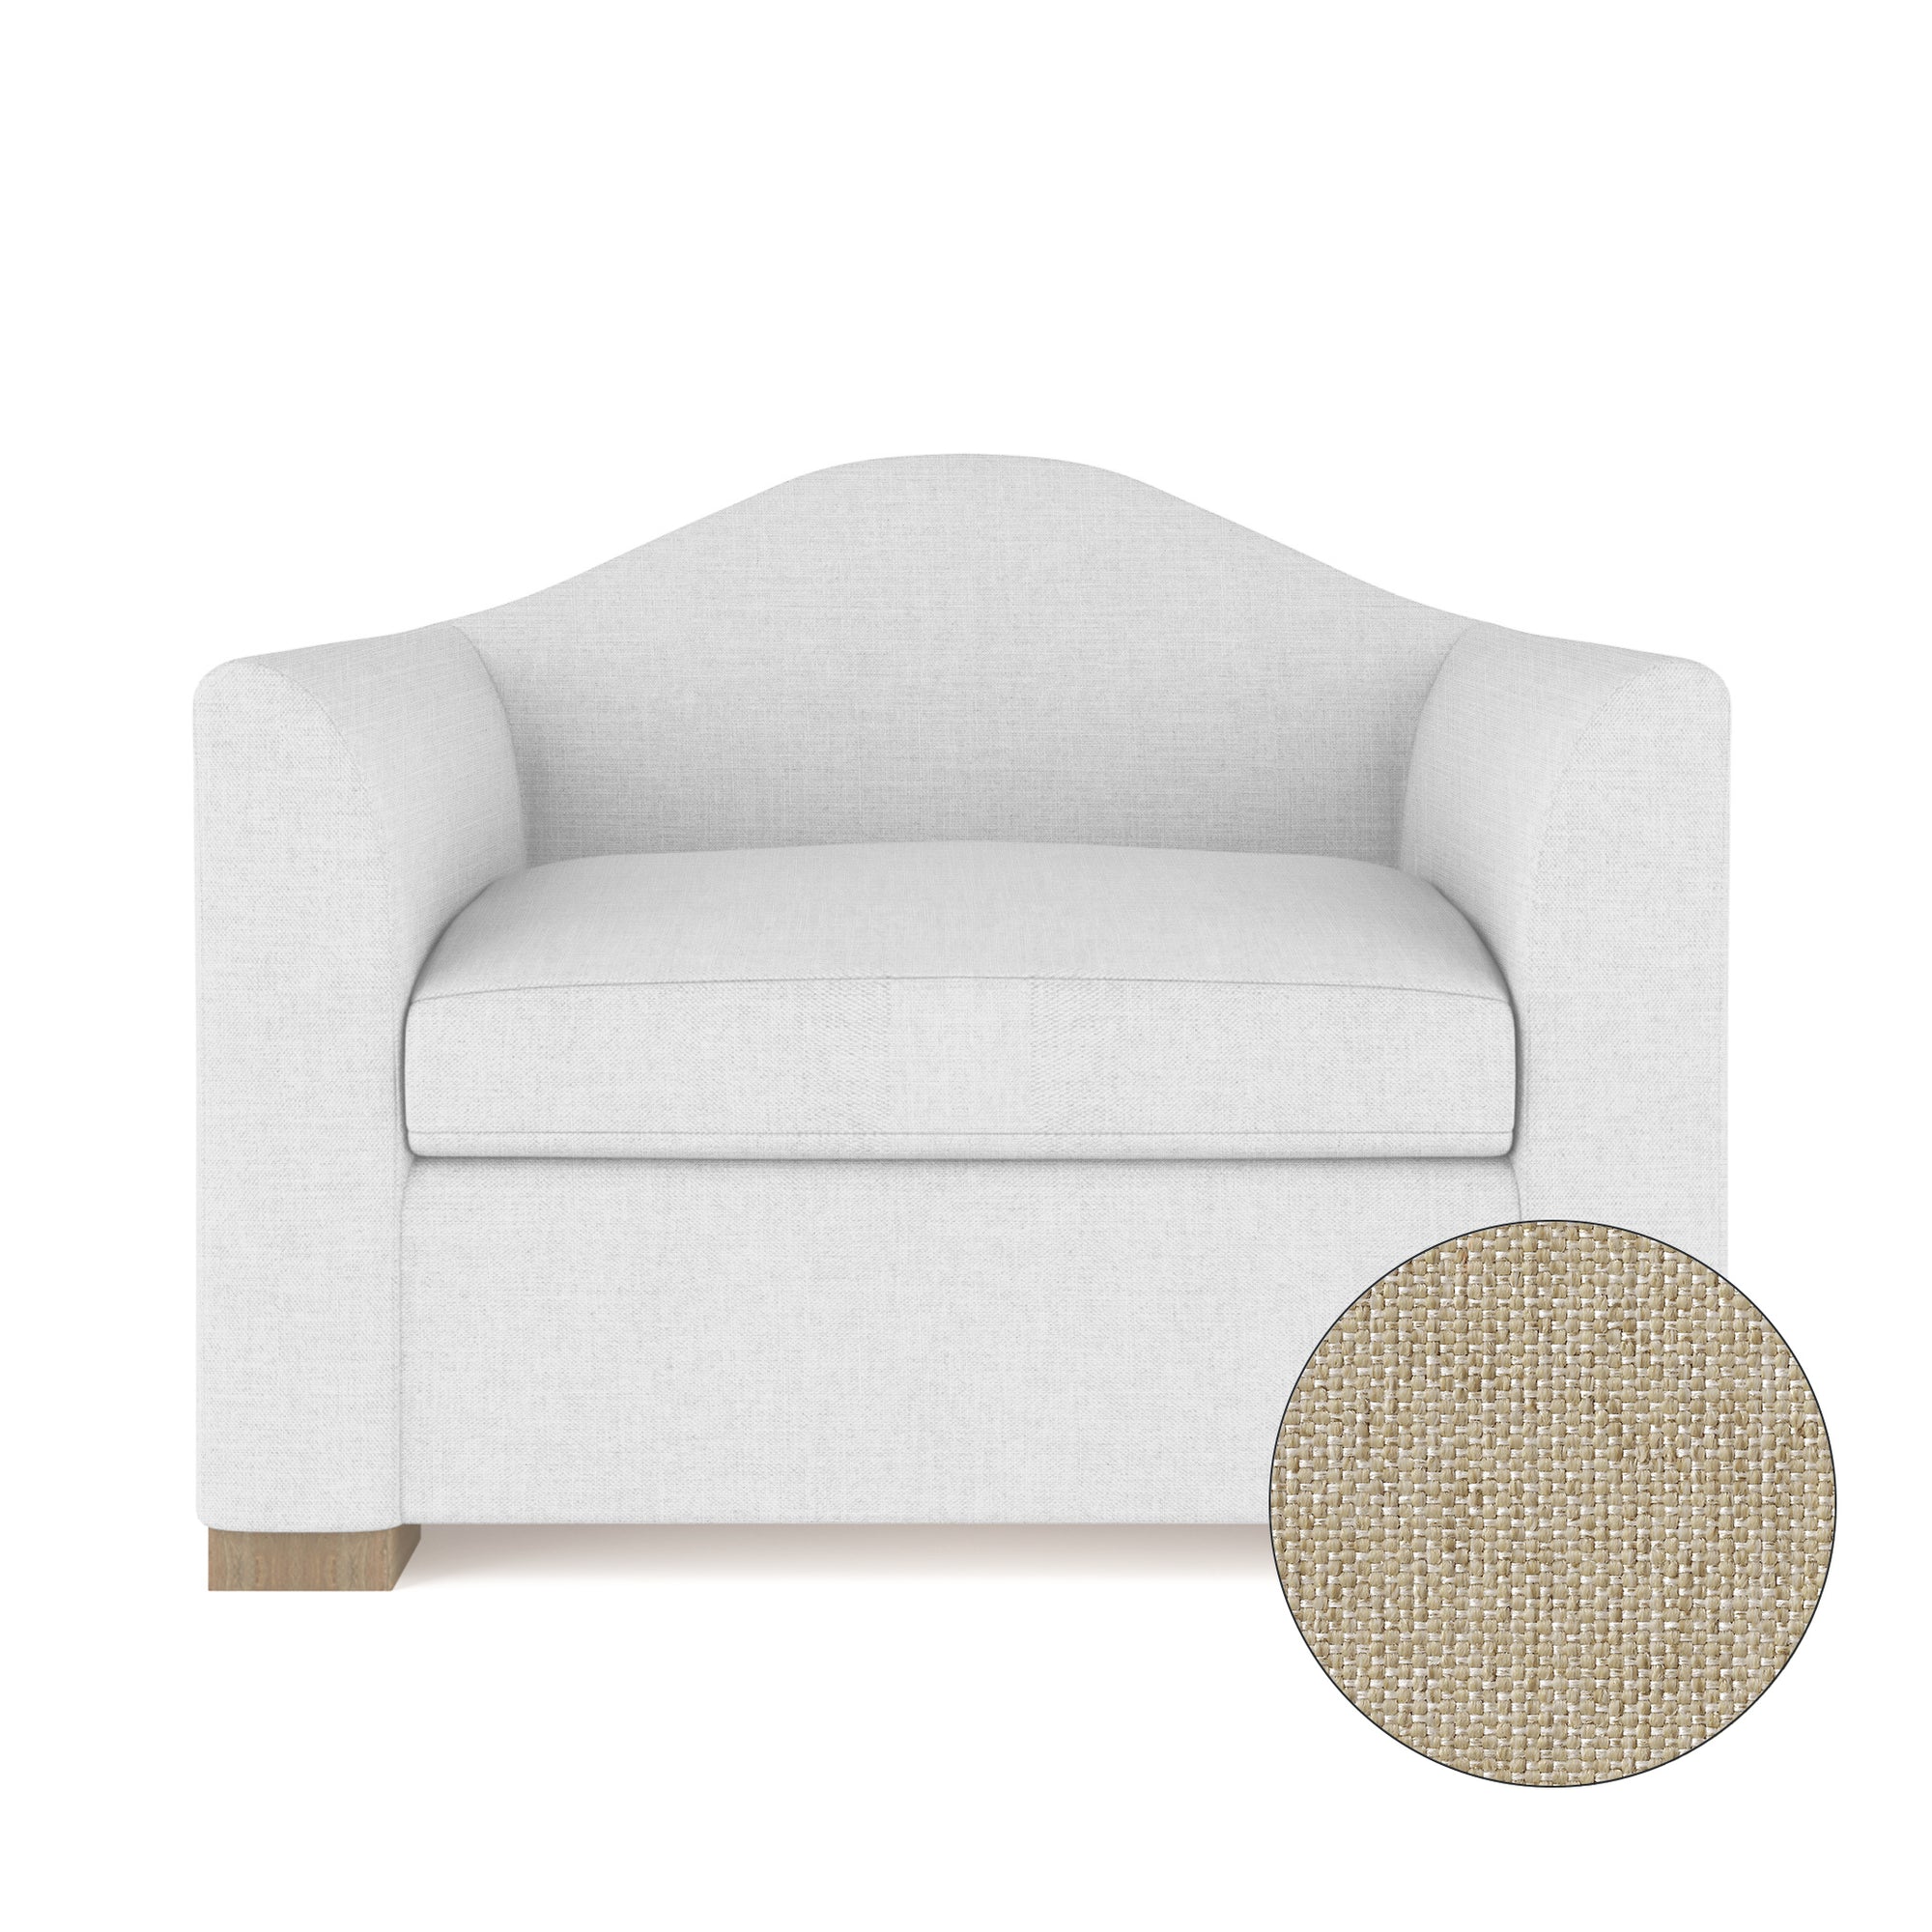 Horatio Chair - Oyster Pebble Weave Linen